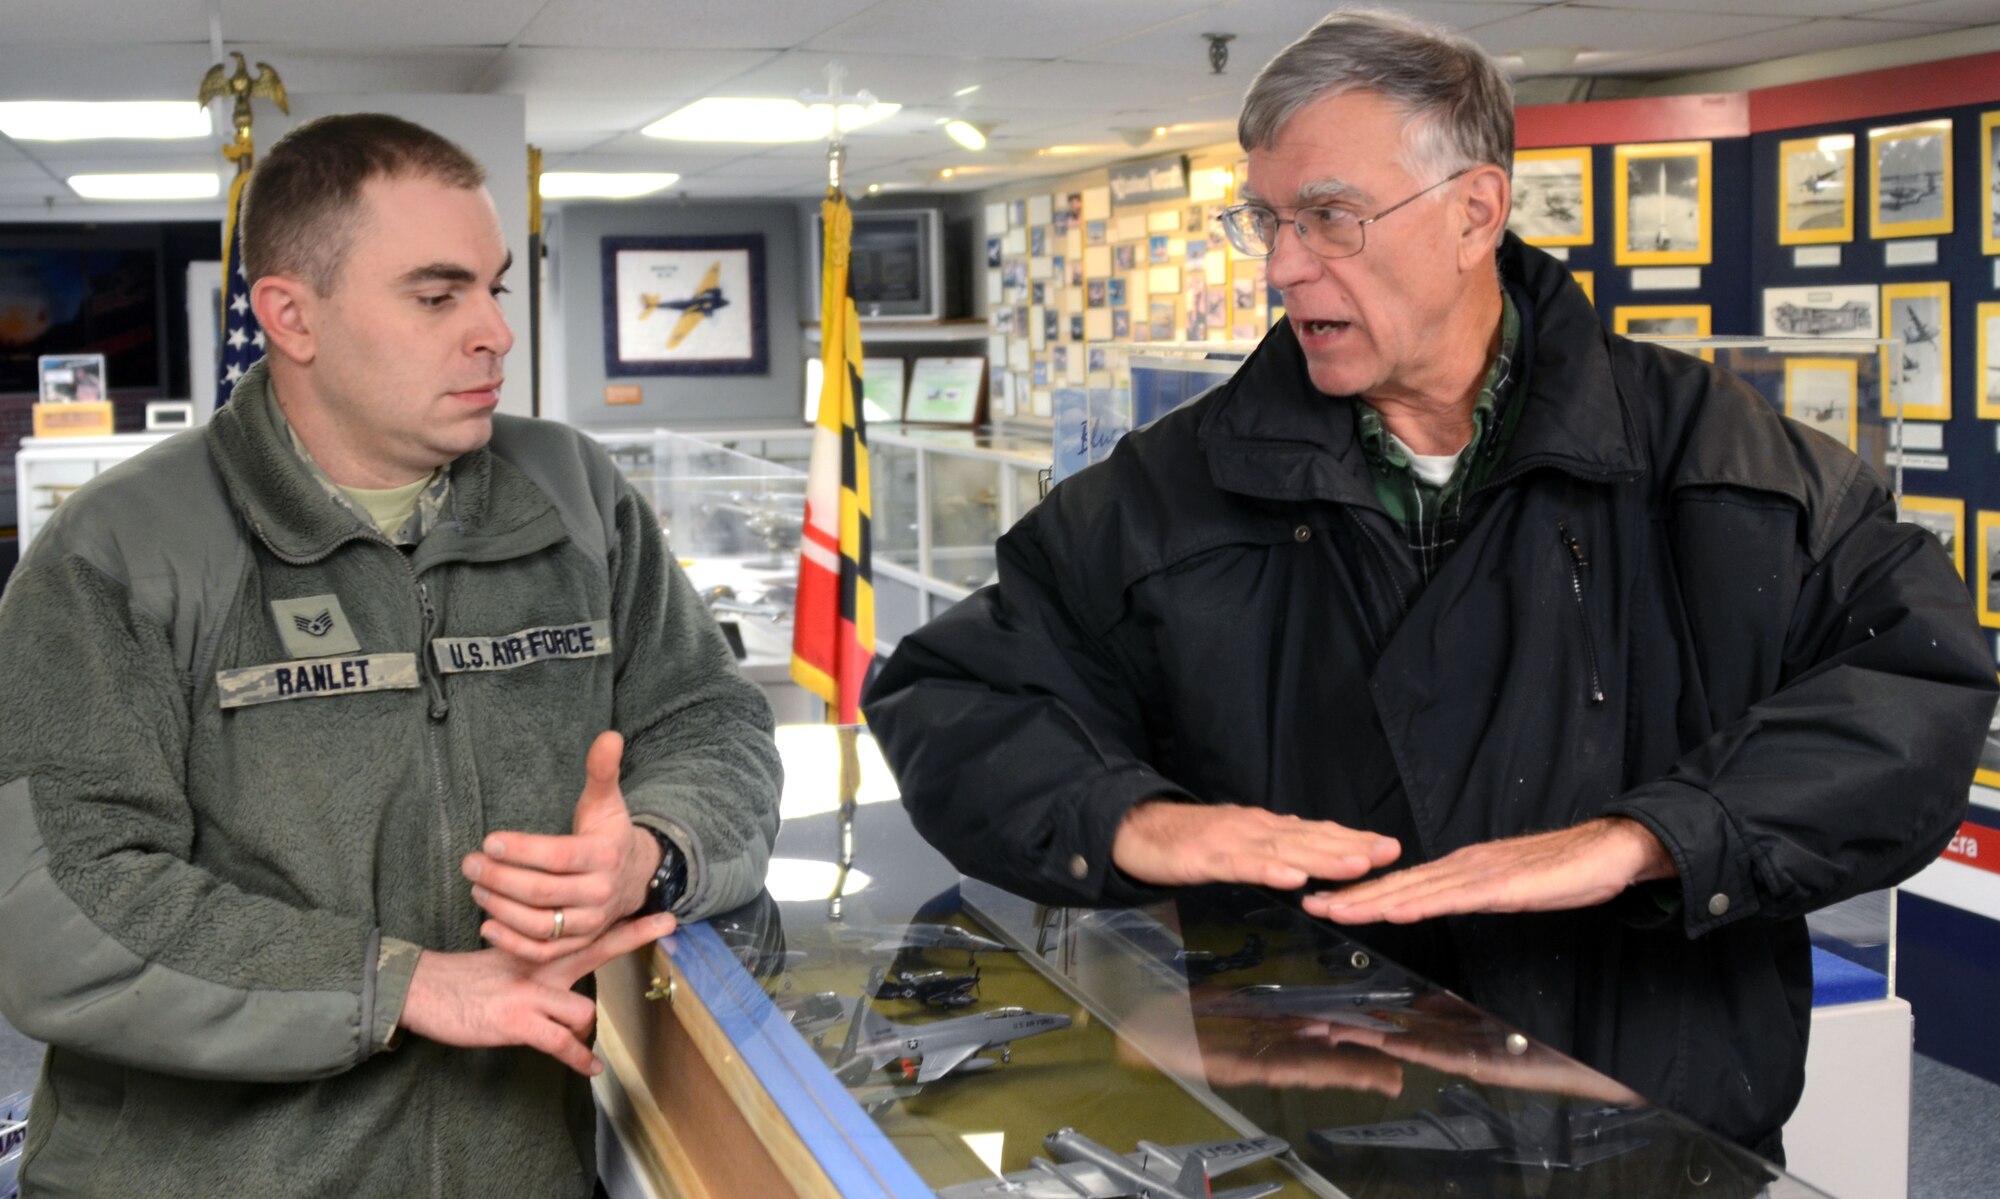 Staff Sgt. Dave Ranlet, 175th Logistic Readiness Squadron, listens to Ted Cooper, director of operations for the Glenn L. Martin Maryland Aviation Museum in Middle River, Md. Ranlet volunteers his off- duty time restoring planes displayed in the museum.  (U.S. Air National Guard photo by Tech. Sgt. David Speicher/RELEASED)